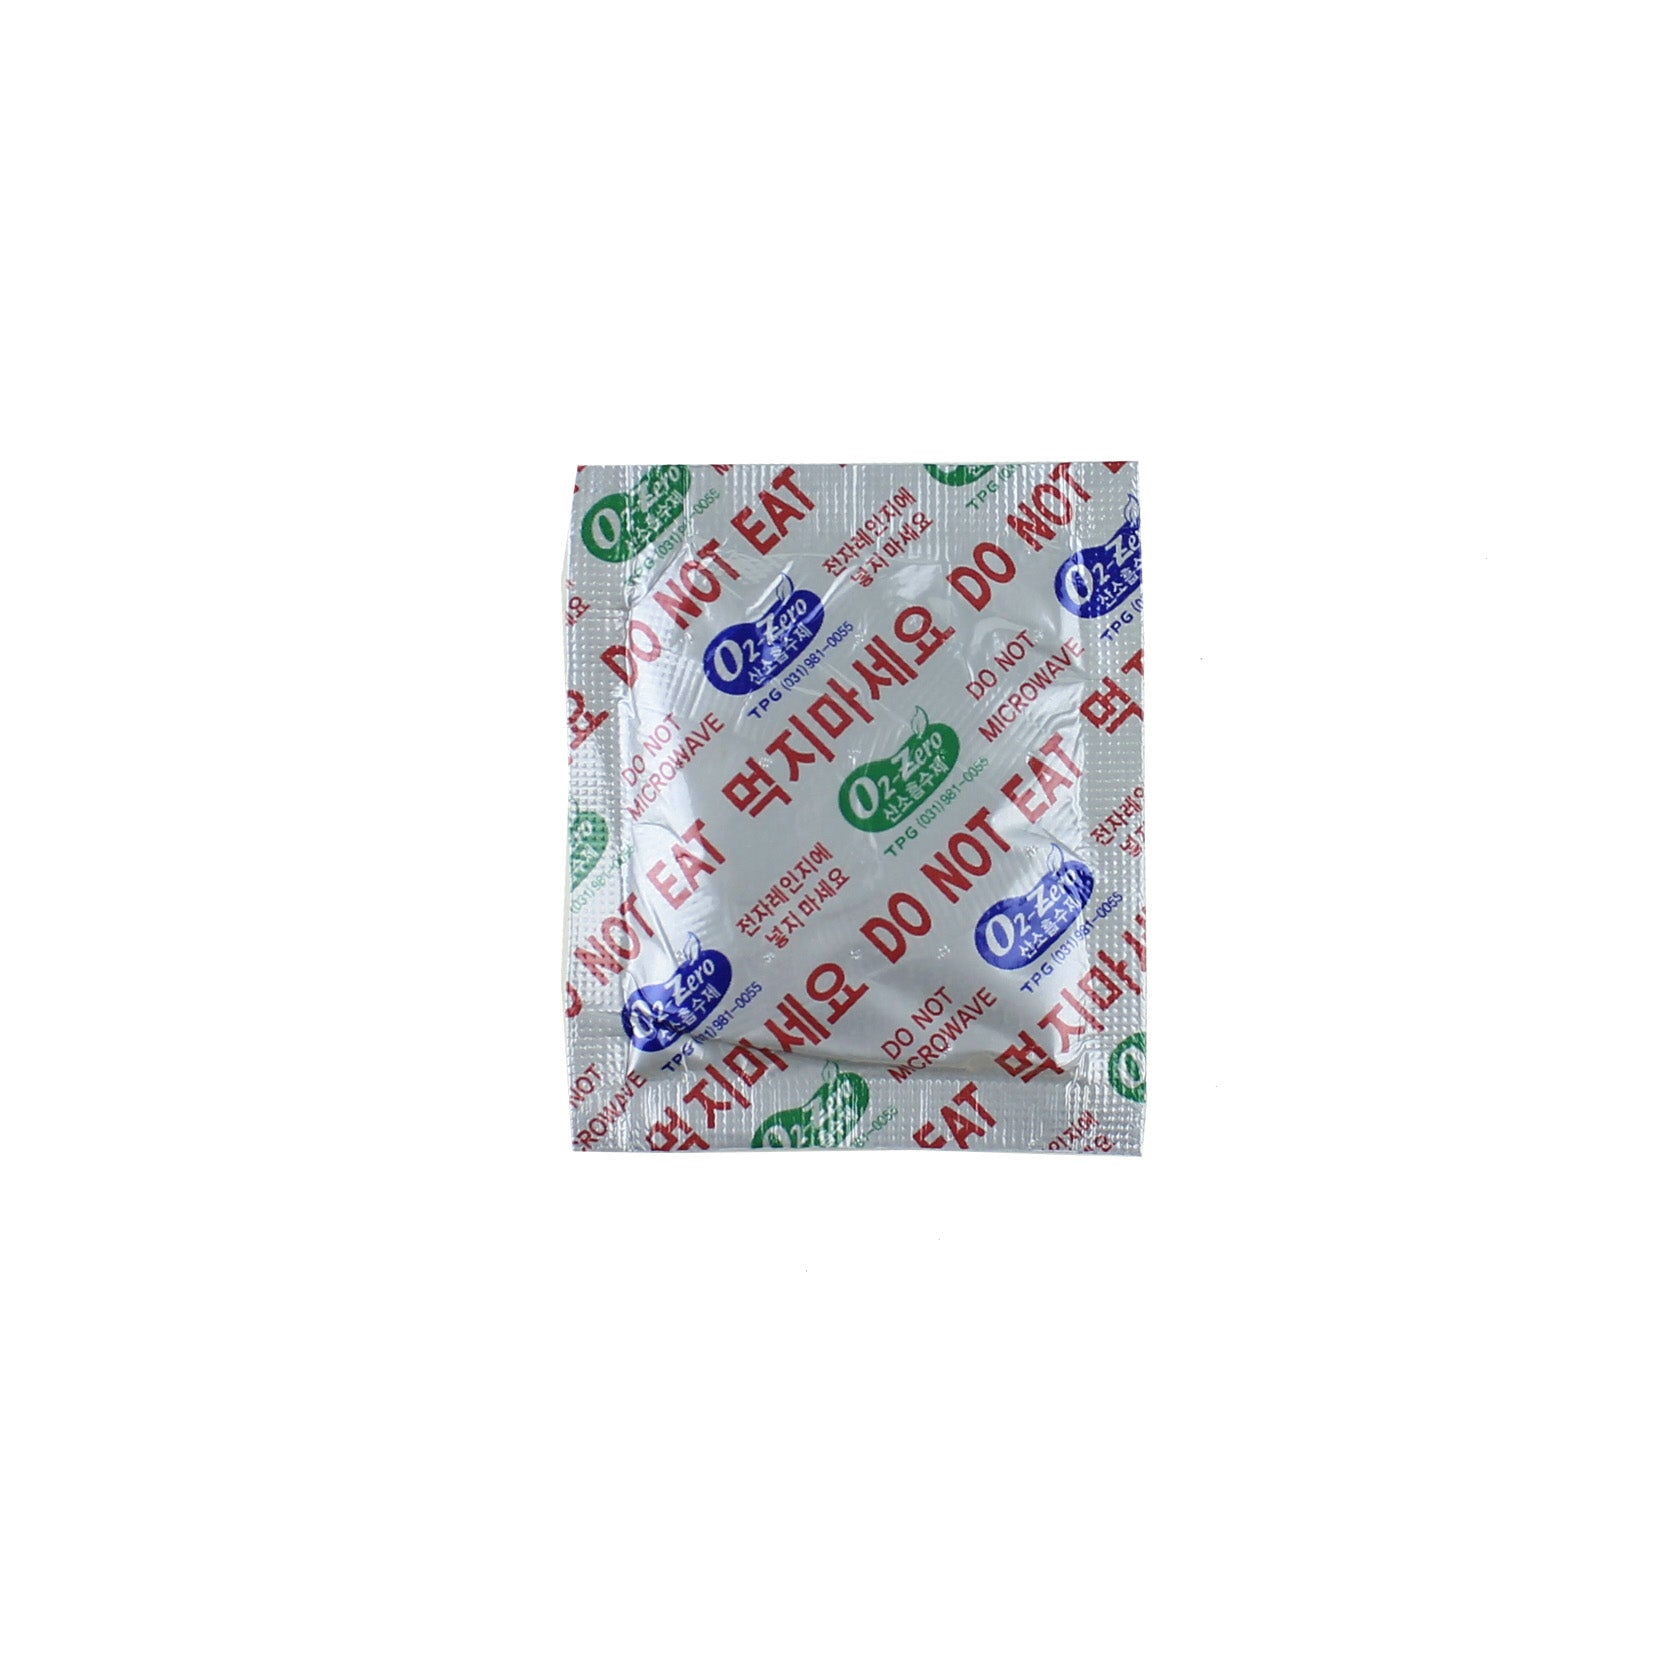 Fresh & Fresh (200 Packs) 400 CC Premium Oxygen Absorbers(4 Bag of 50 Packets) - ISO 9001 & 14001 Certified Facility Manufactured